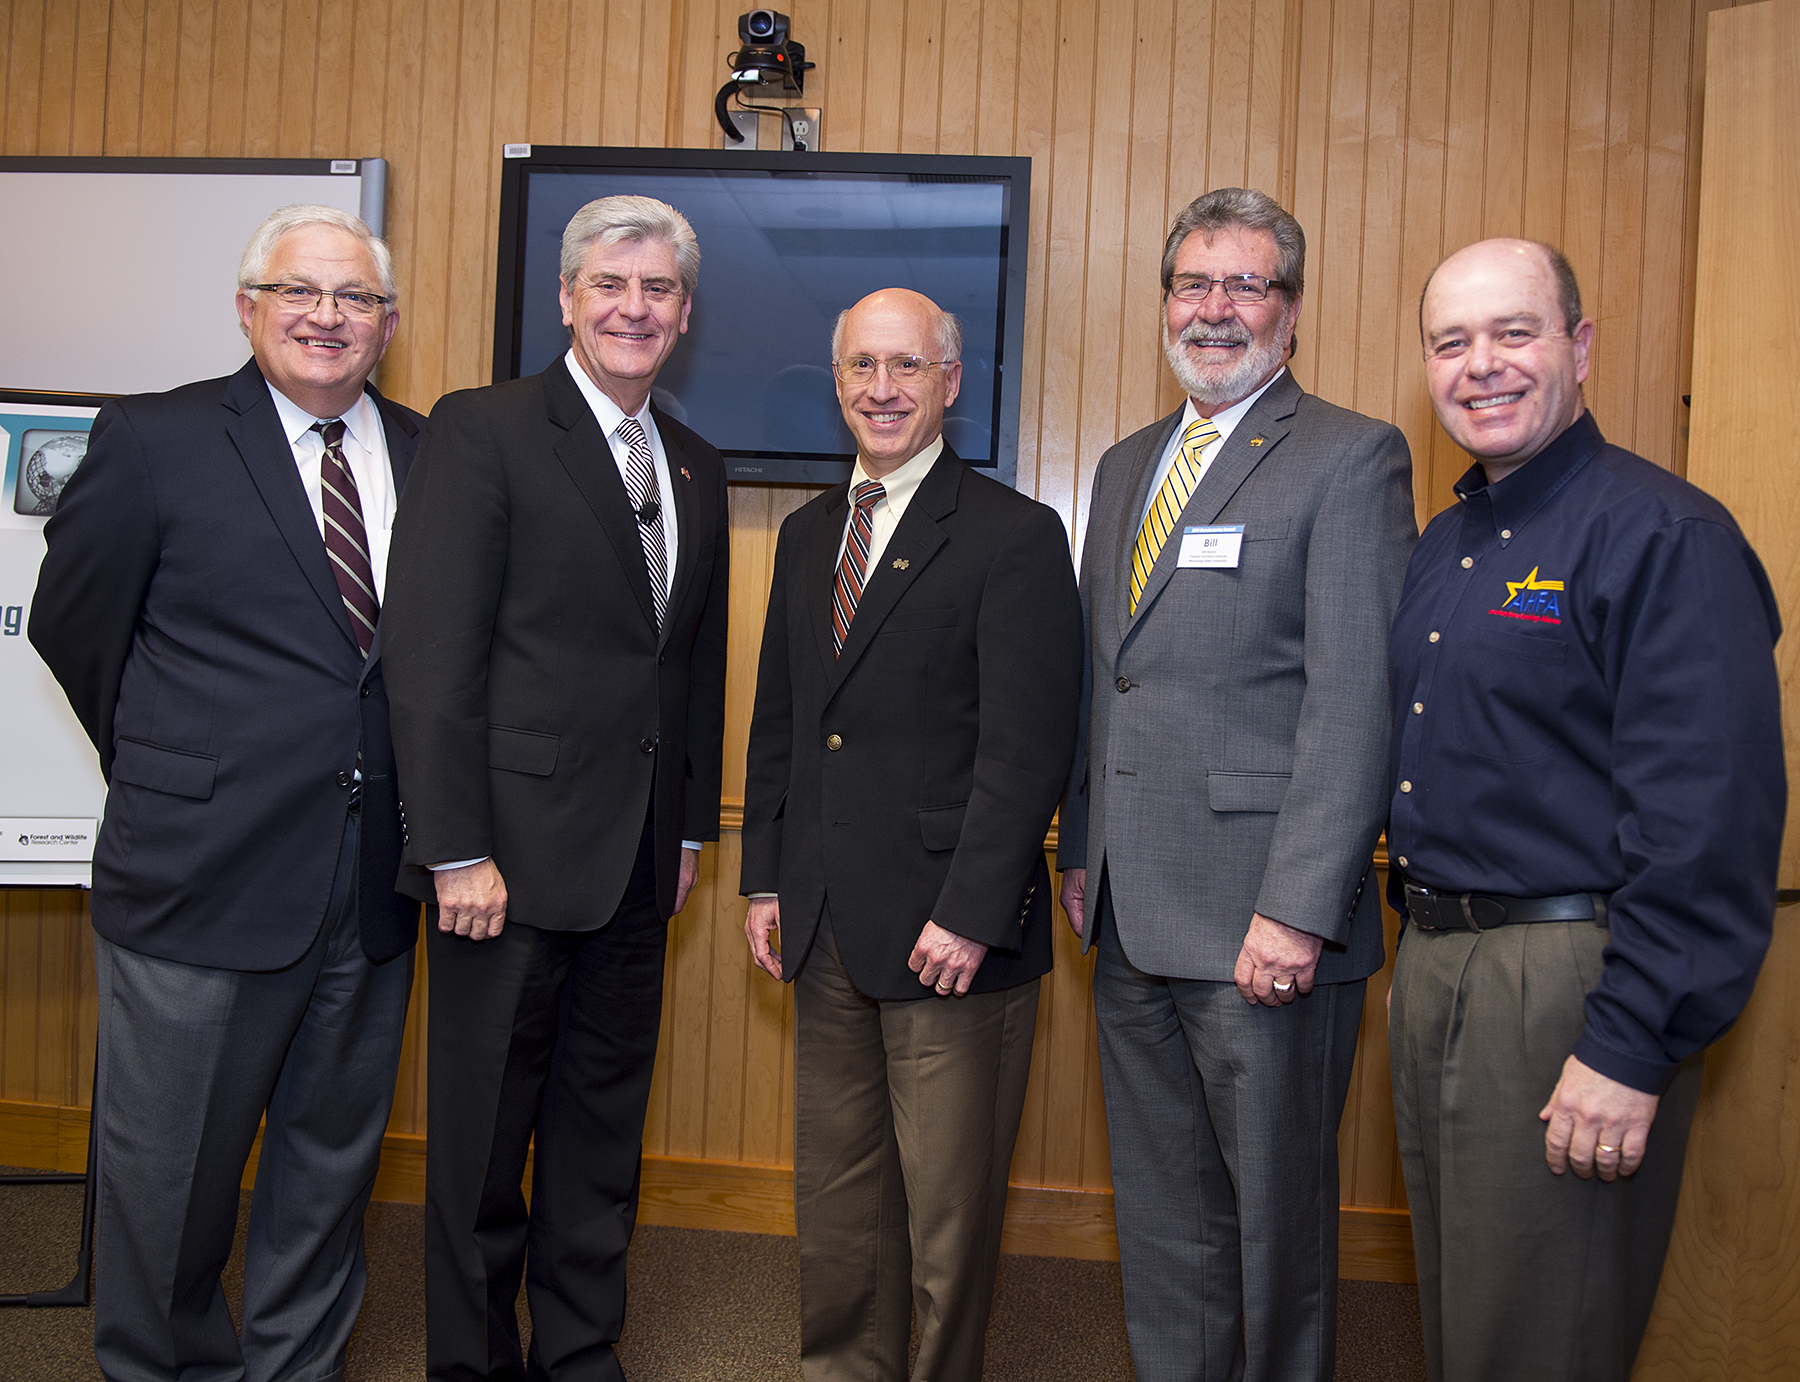 Mississippi State University hosted the 2015 Manufacturing Summit, "Focus on the Future," on Wednesday [March 18]. From left are former MSU President Malcolm A. Portera, Gov. Phil Bryant, MSU Vice President for Research and Economic Development David Shaw, Franklin Furniture Institute Director Bill Martin and American Home Furnishings Alliance Vice President of Regulatory Affairs Bill Perdue.